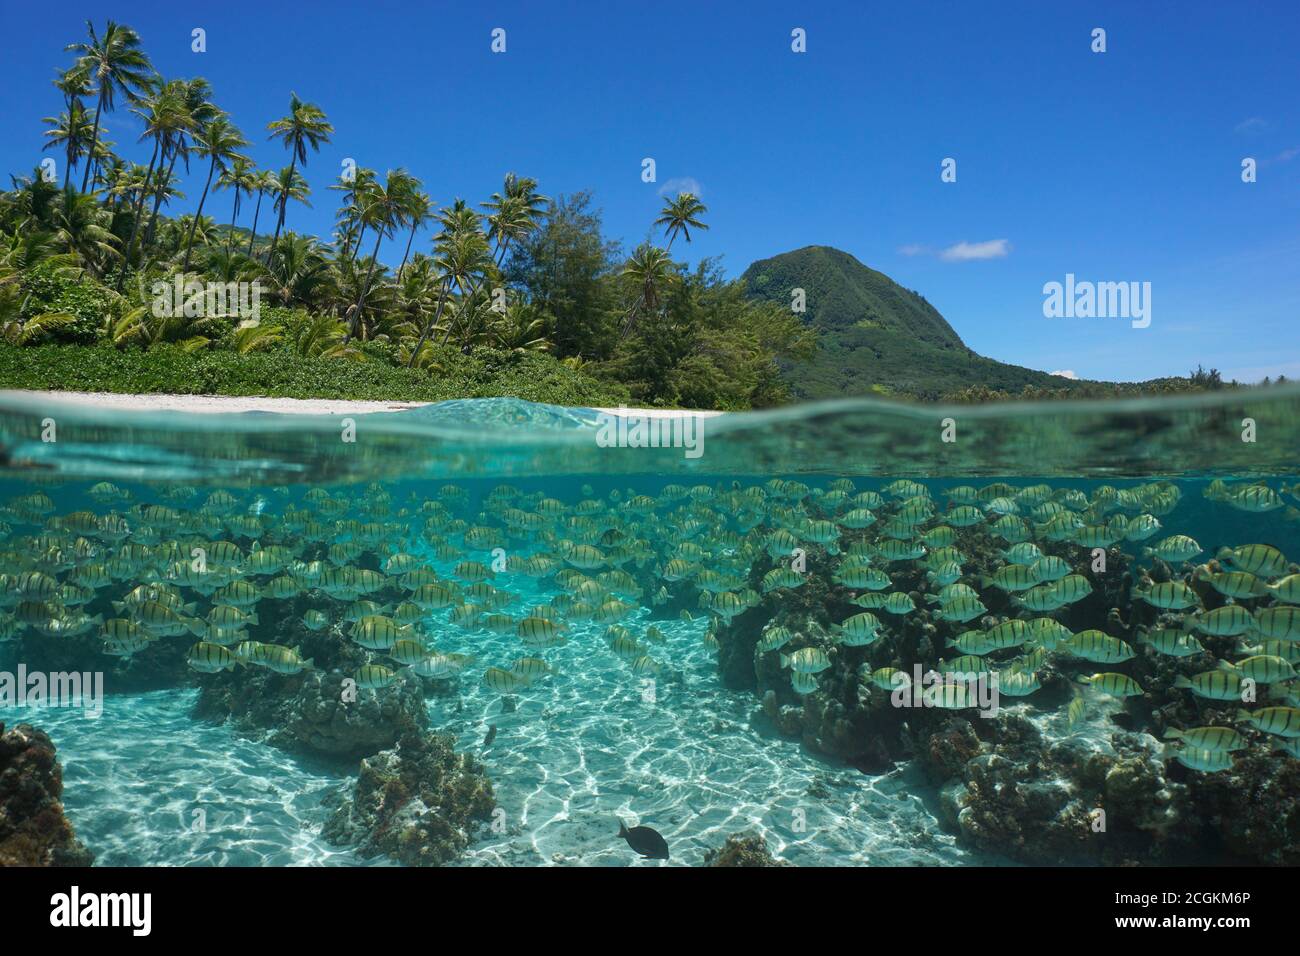 South Pacific island, shoal of fish underwater in the ocean and tropical coast, split view over-under water surface, French Polynesia, Oceania Stock Photo